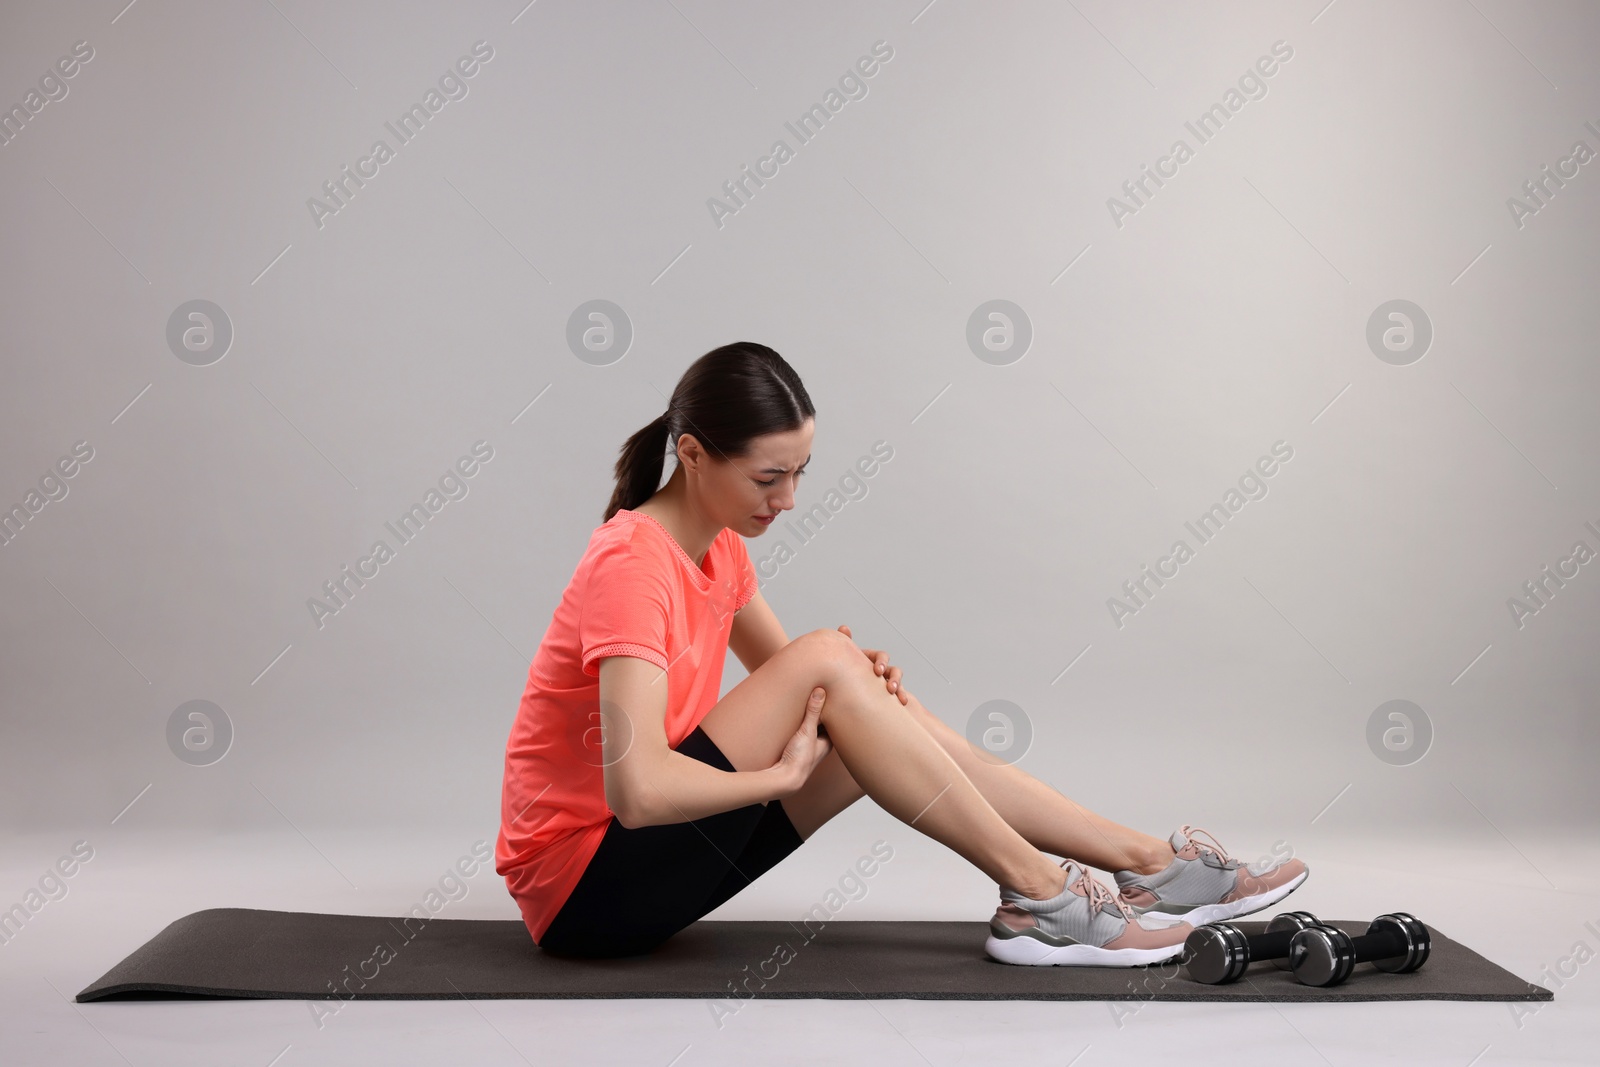 Photo of Young woman suffering from leg pain on exercise mat against grey background